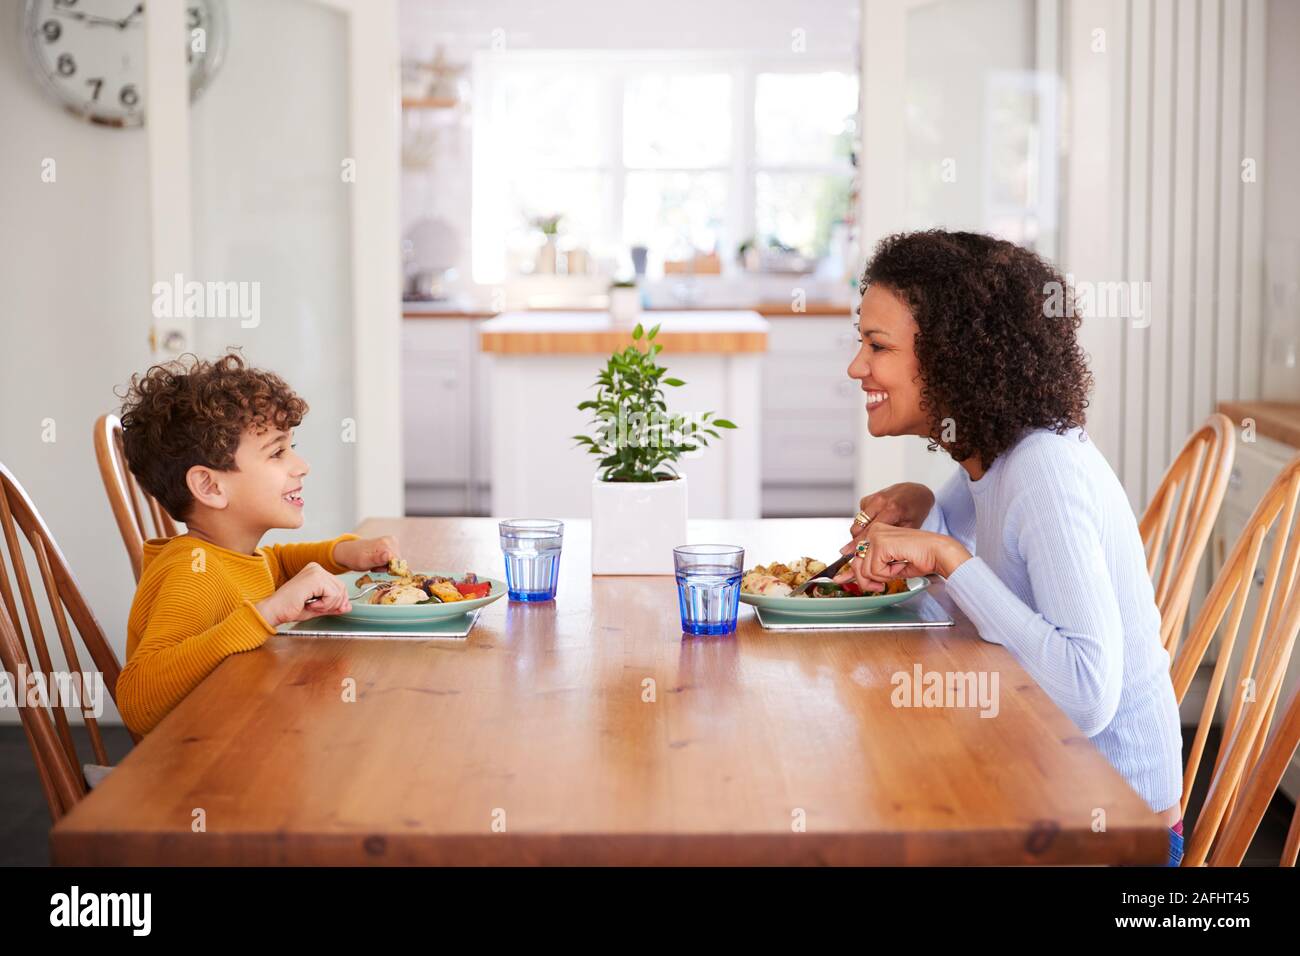 Single Mother Sitting At Table Eating Meal With Son In Kitchen At Home Stock Photo